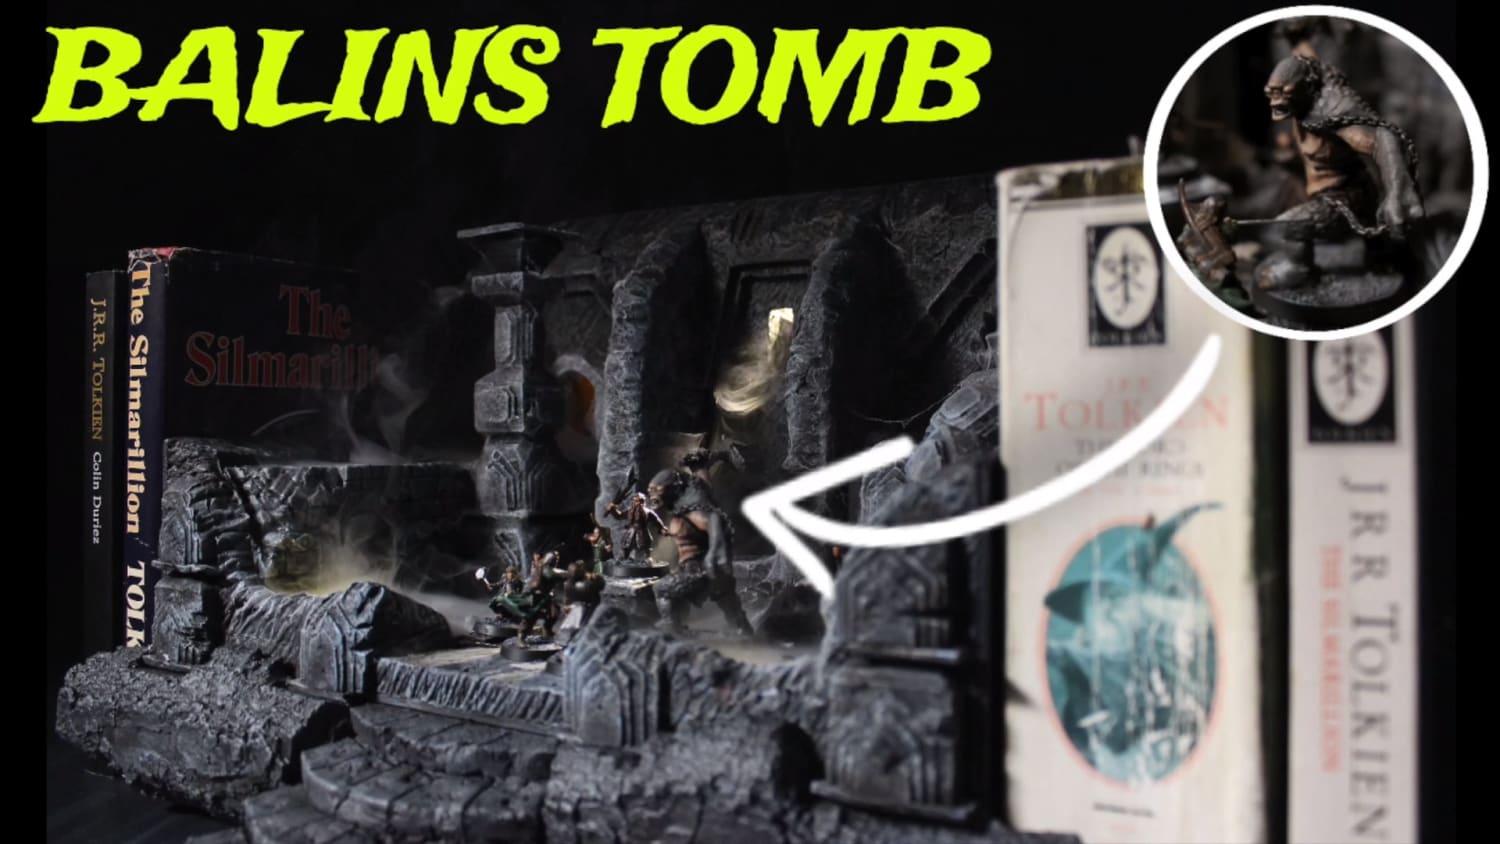 I made a miniature set for Balins Tomb from the Lord Of The Rings and recreated the Cave Troll fight scene in miniature. Such a fun project. I will leave a link in the comments for anyone who would like to see how i build it from scratch. Please check it out, thank you